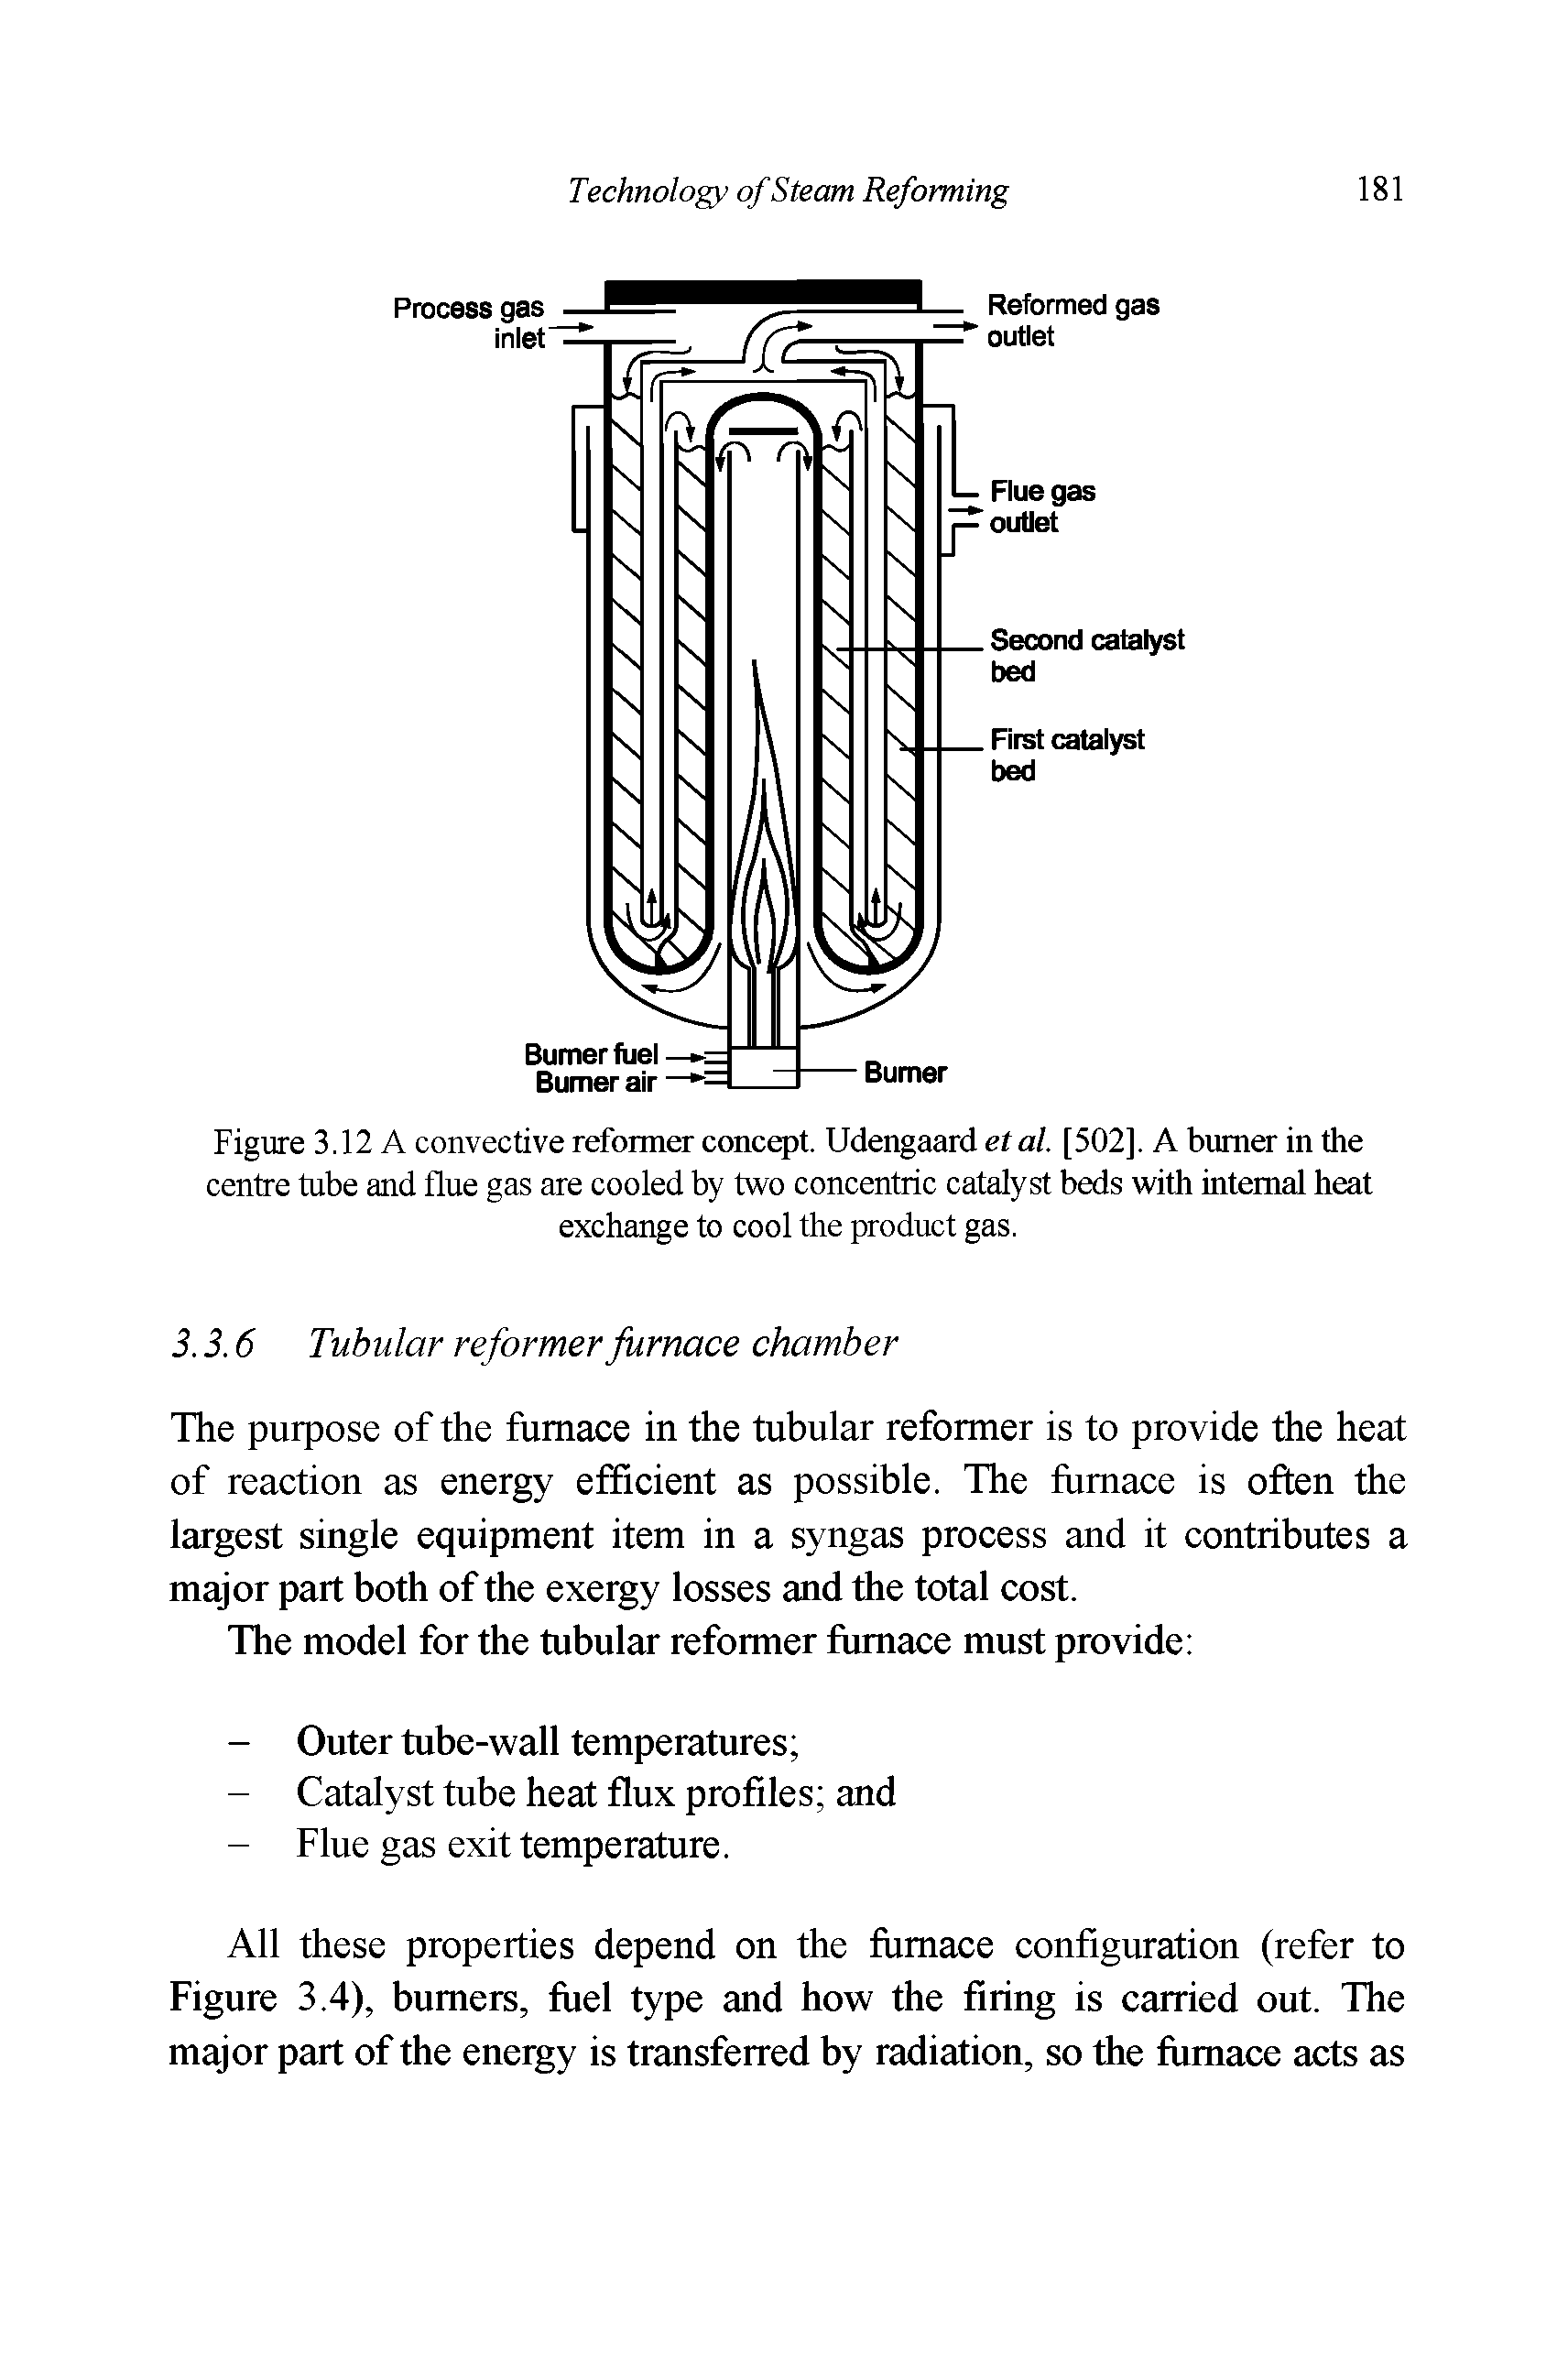 Figure 3.12 A convective reformer concept. Udengaard ef a/. [502]. A burner in the centre tube and flue gas are cooled by two concentric catalyst beds with internal heat exchange to cool the product gas.